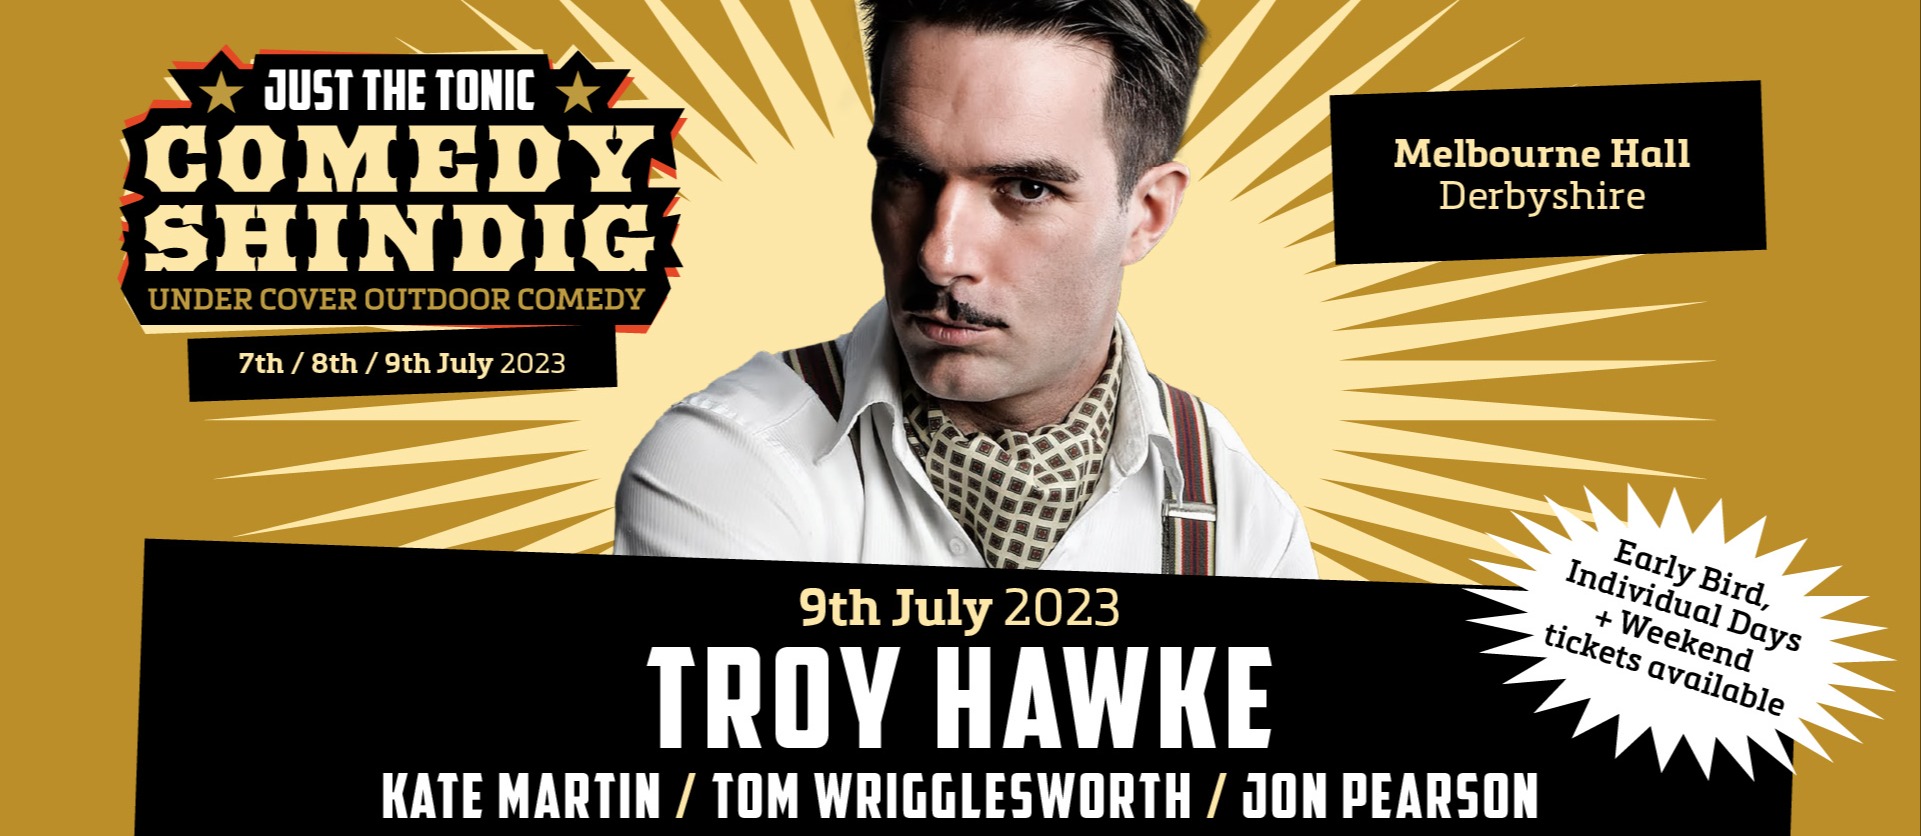 Just the Tonic Comedy Shindig with Troy Hawke - Melbourne 